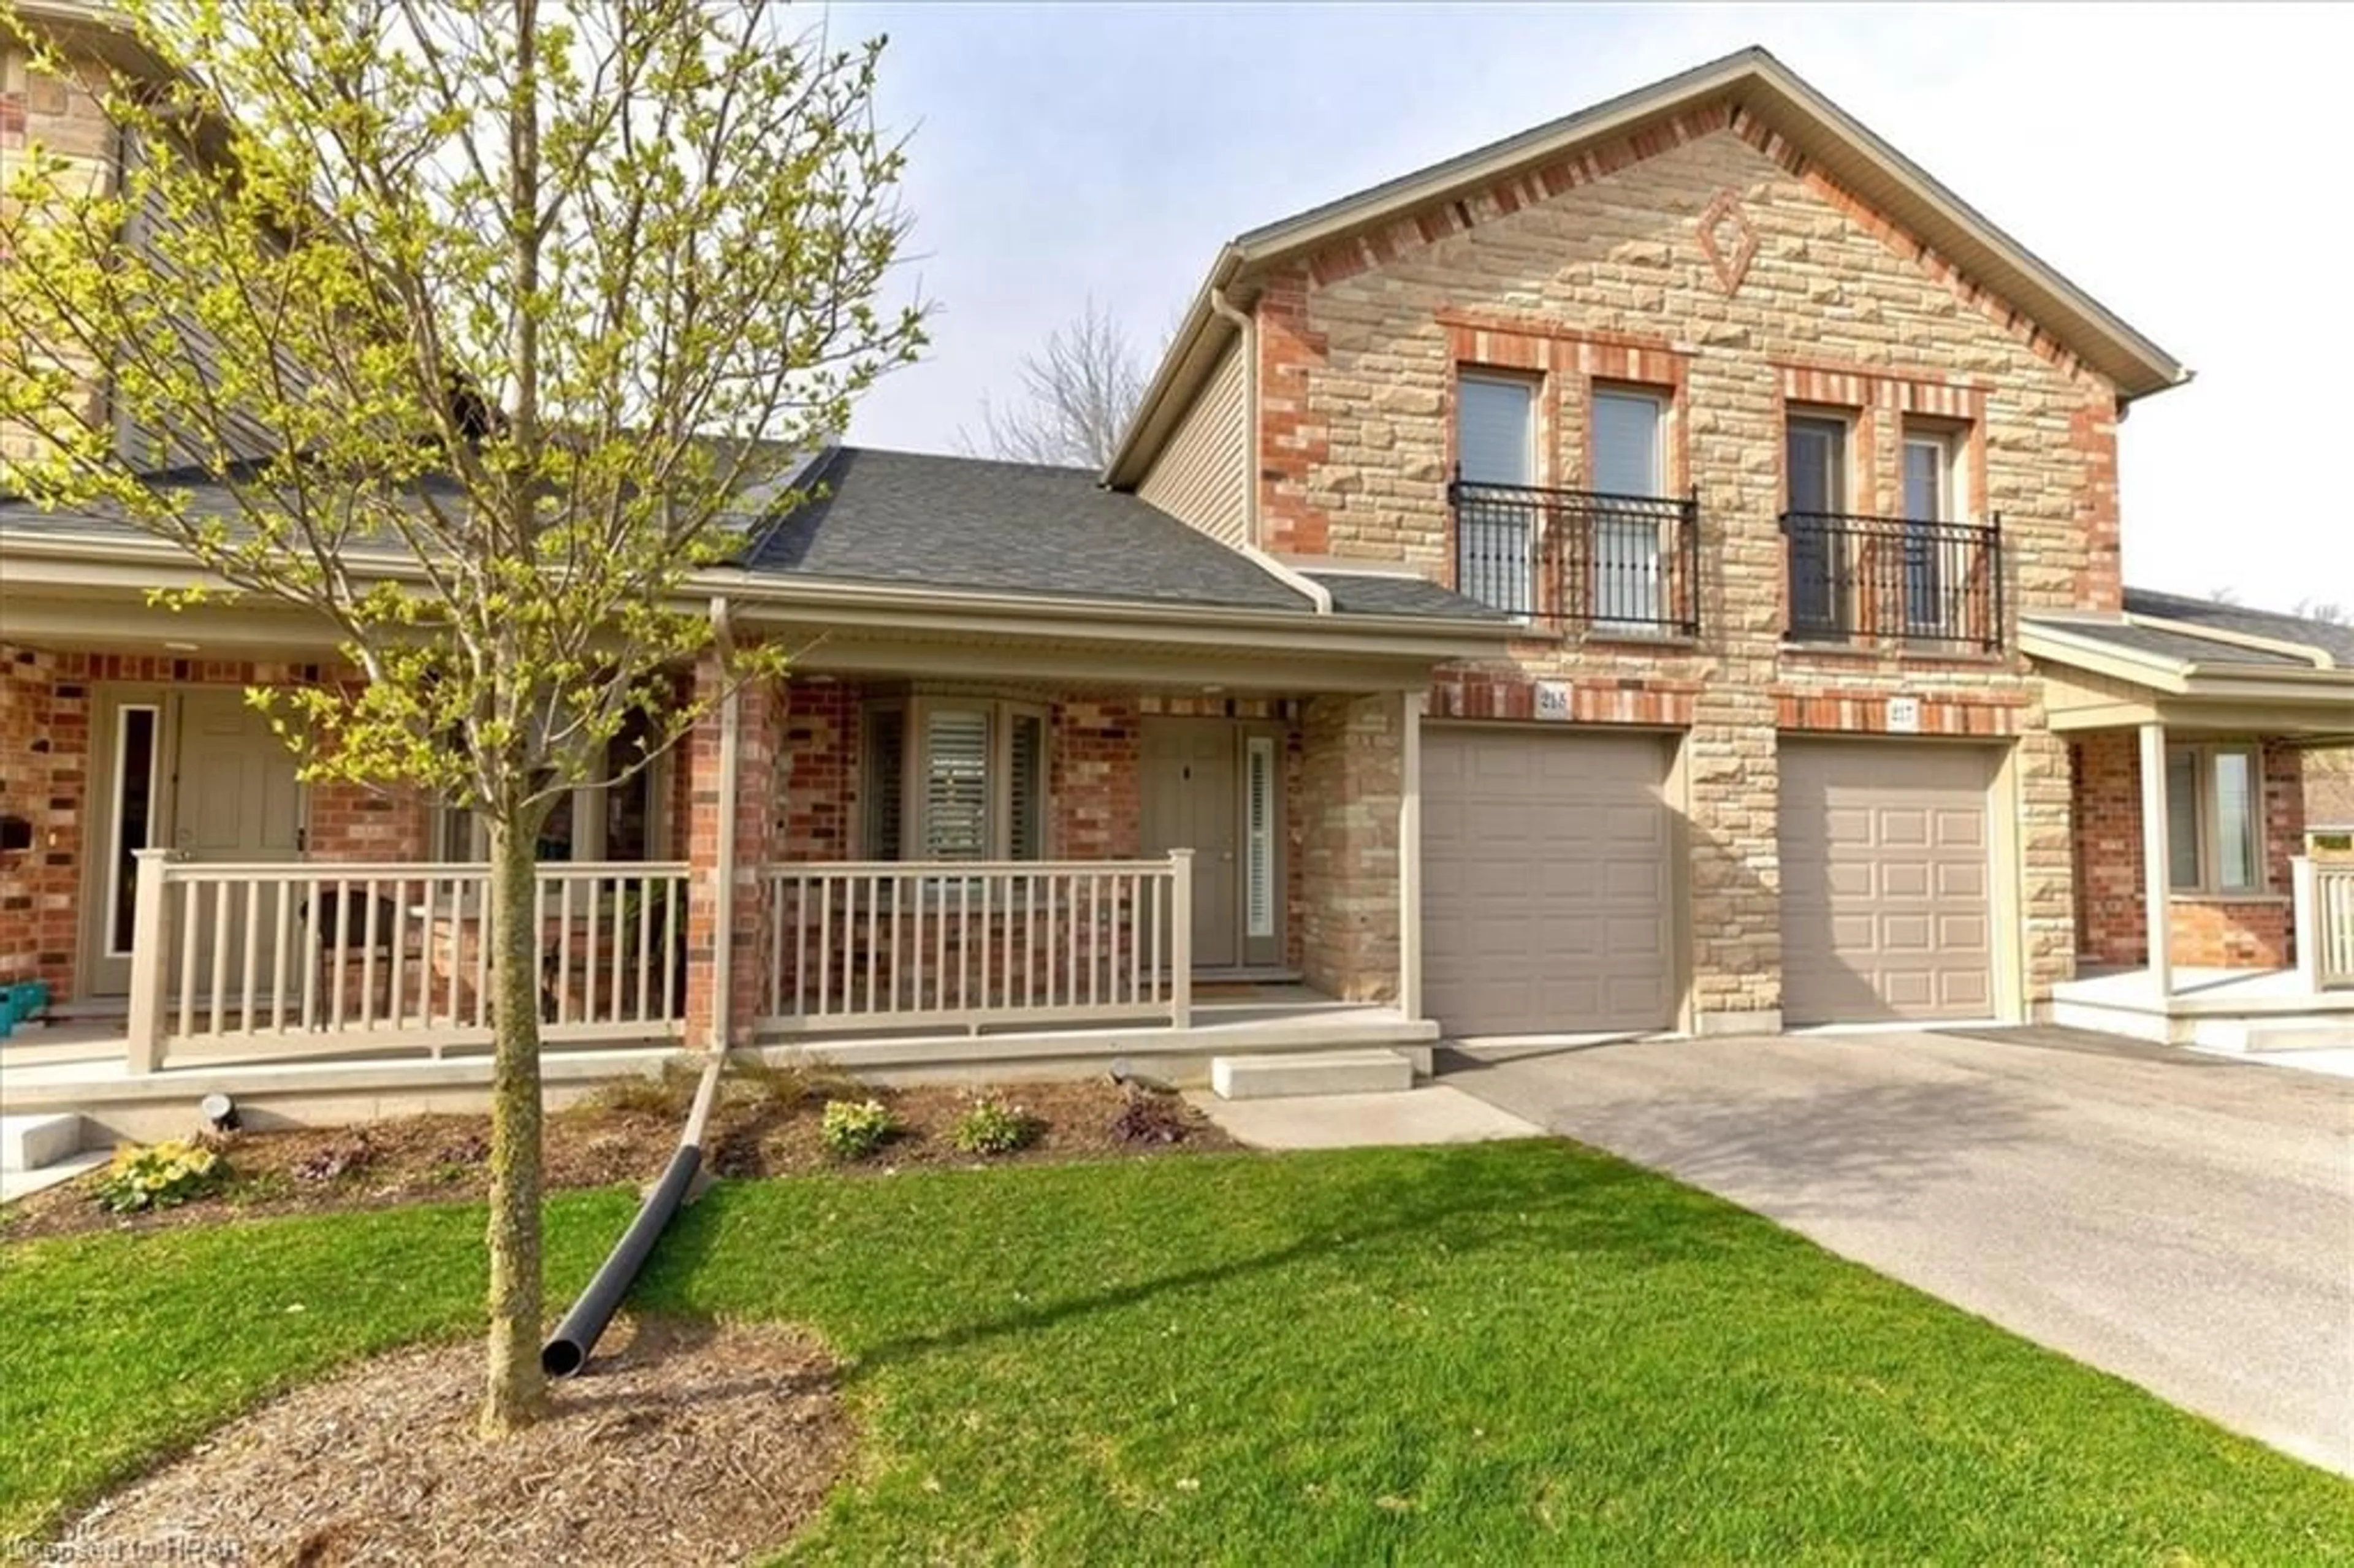 Home with brick exterior material for 50 Galt Rd #215, Stratford Ontario N5A 0B2